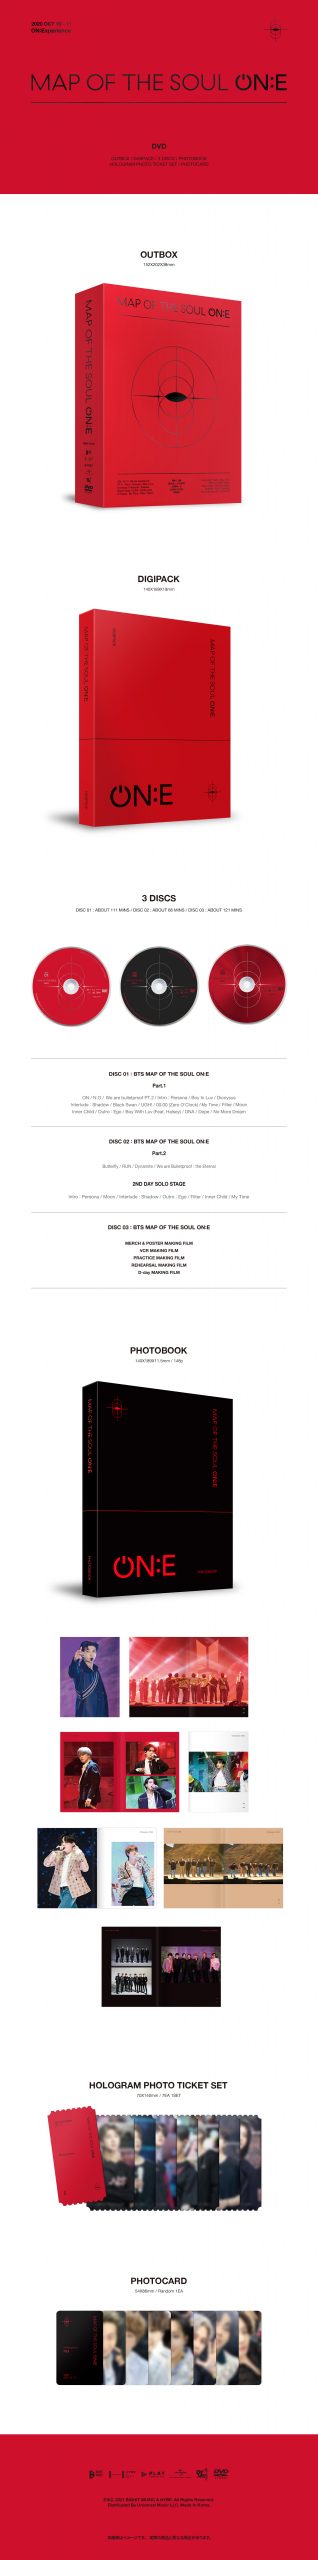 BTS  map of the soul one DVD